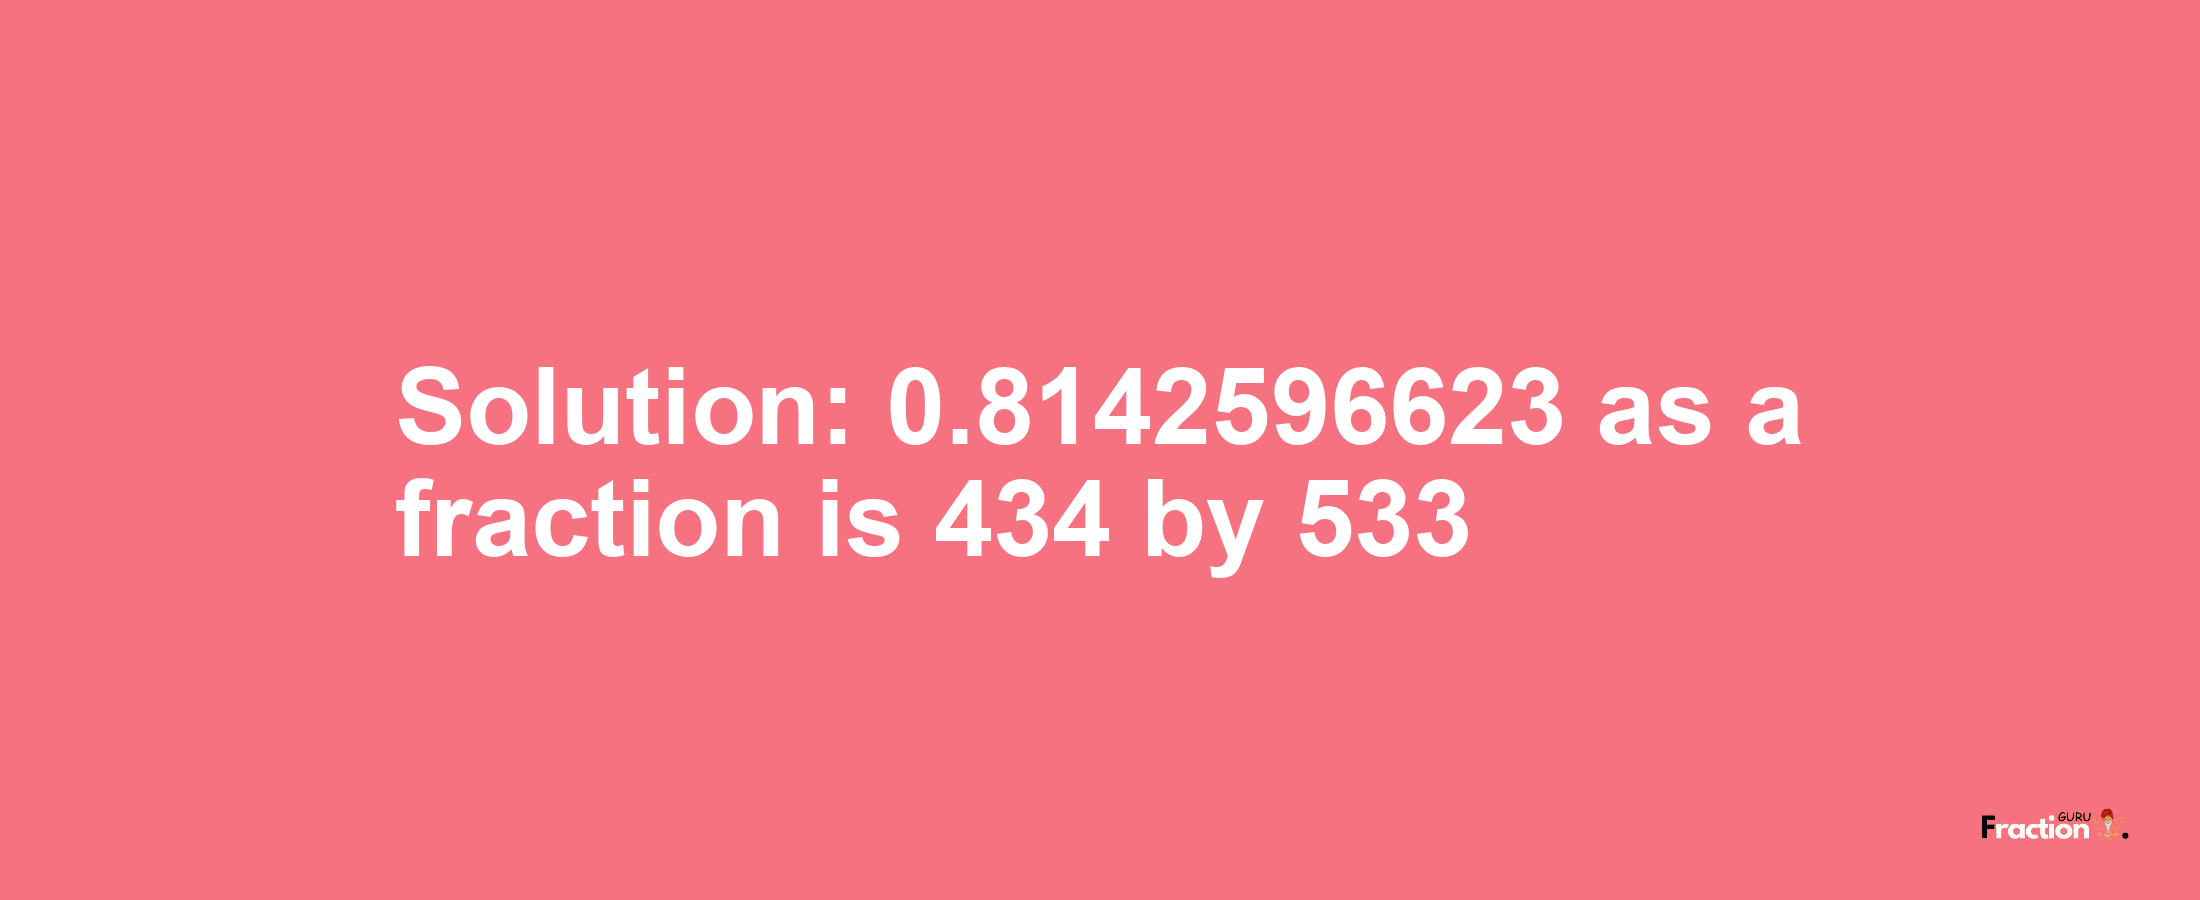 Solution:0.8142596623 as a fraction is 434/533